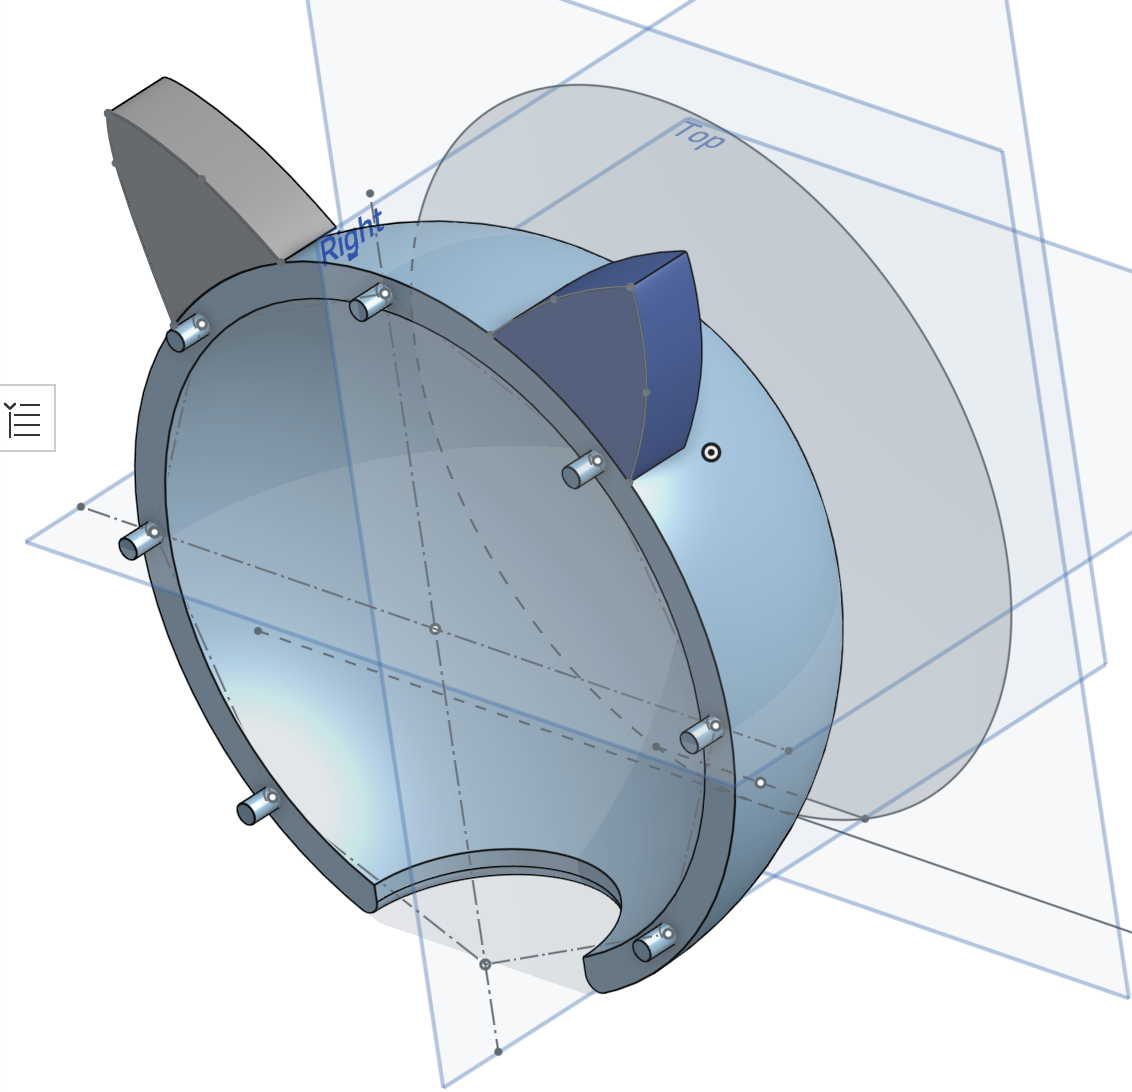 First iteration of front of head